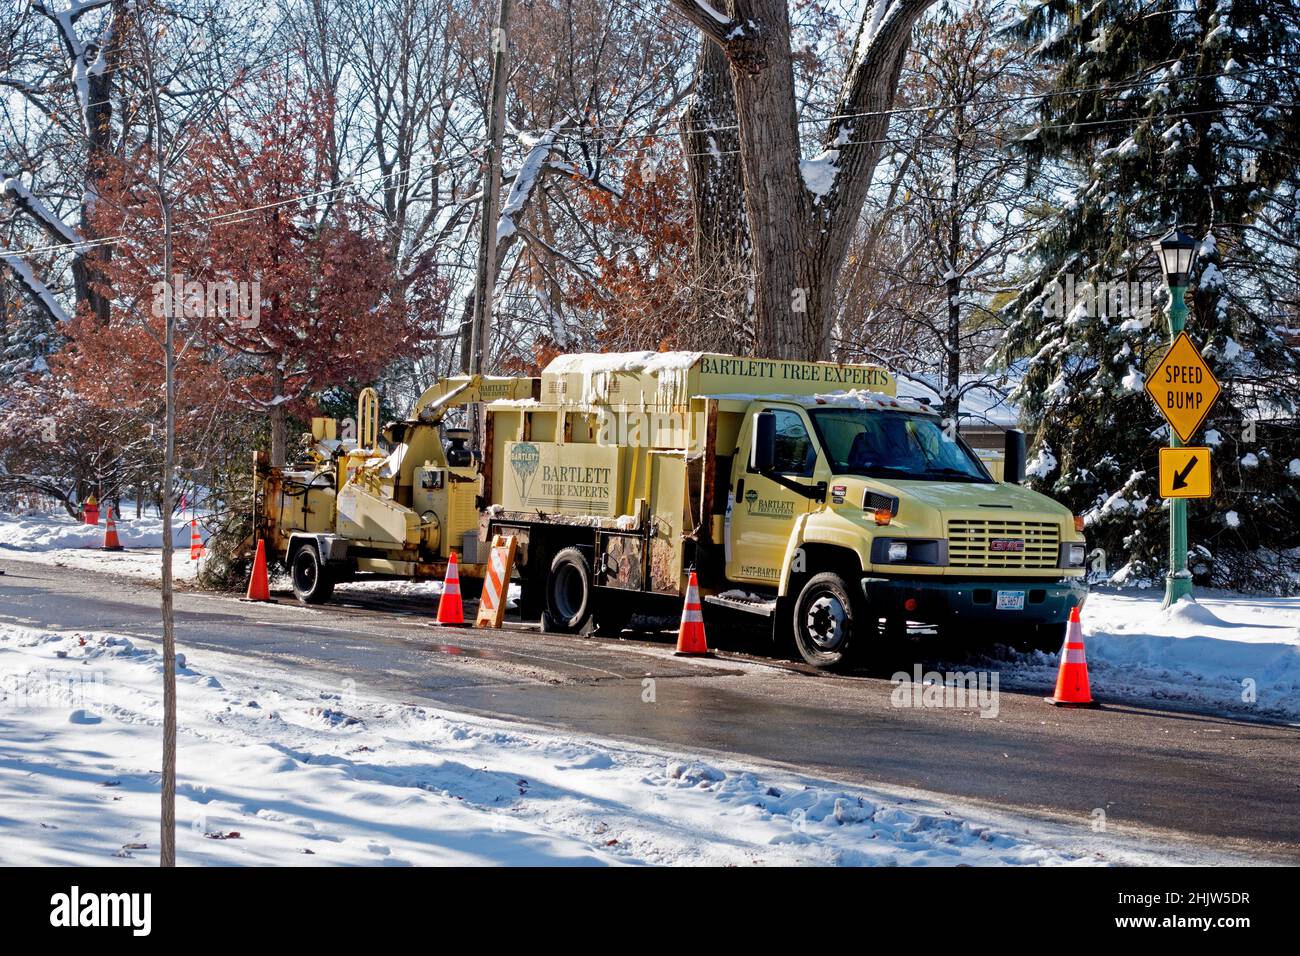 Truck for shredding winter tree trimming surrounded by orange warning cones for safety. St Paul Minnesota MN USA Stock Photo